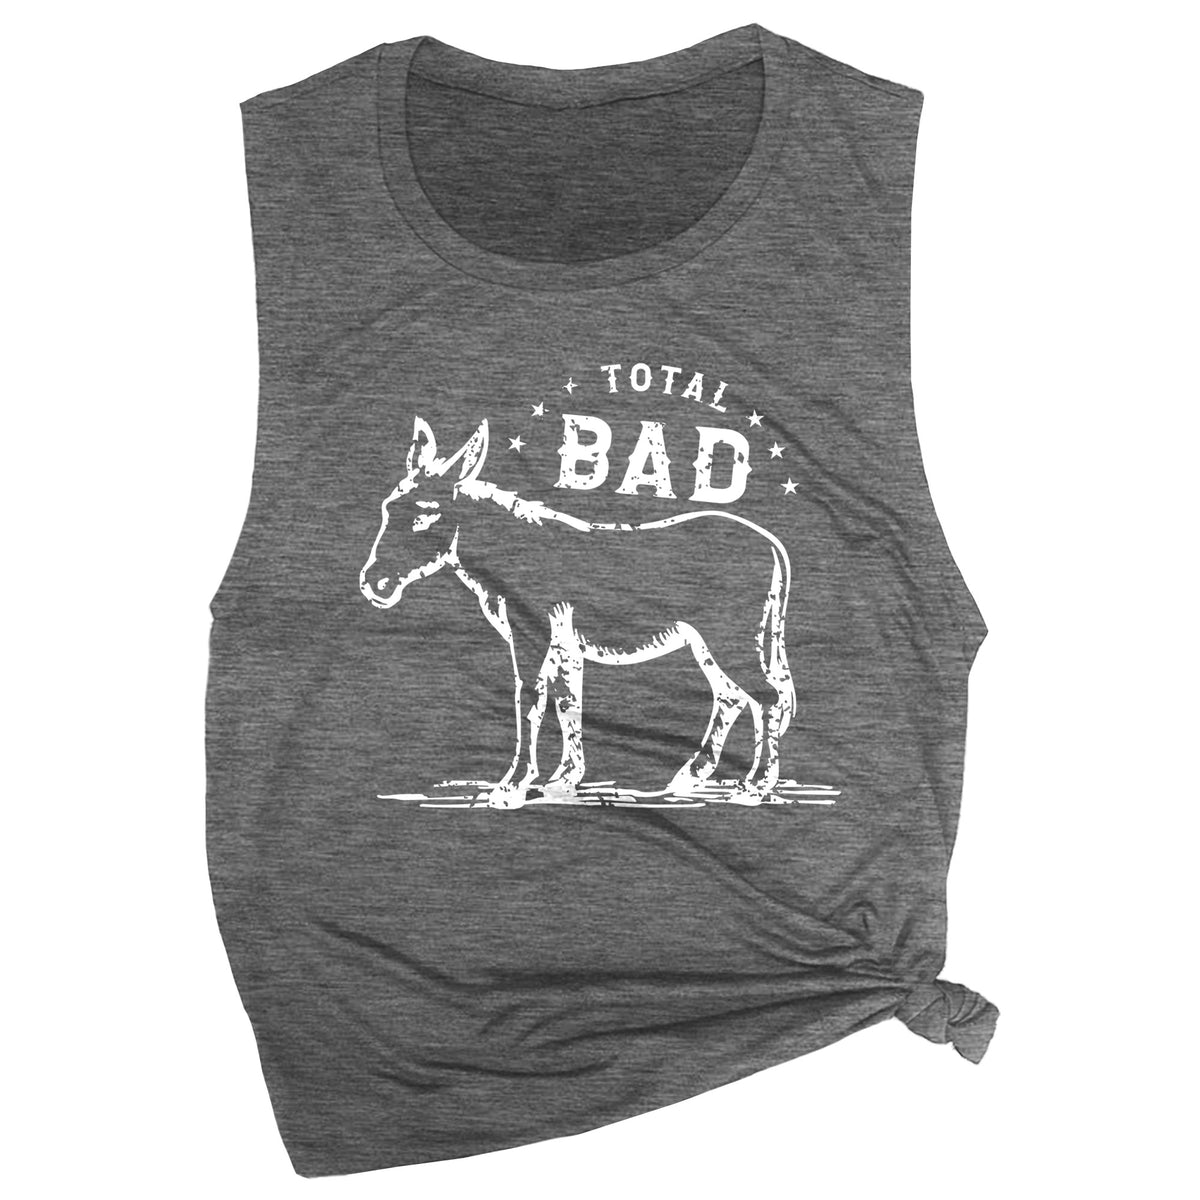 Total Bad Donkey Muscle Tee